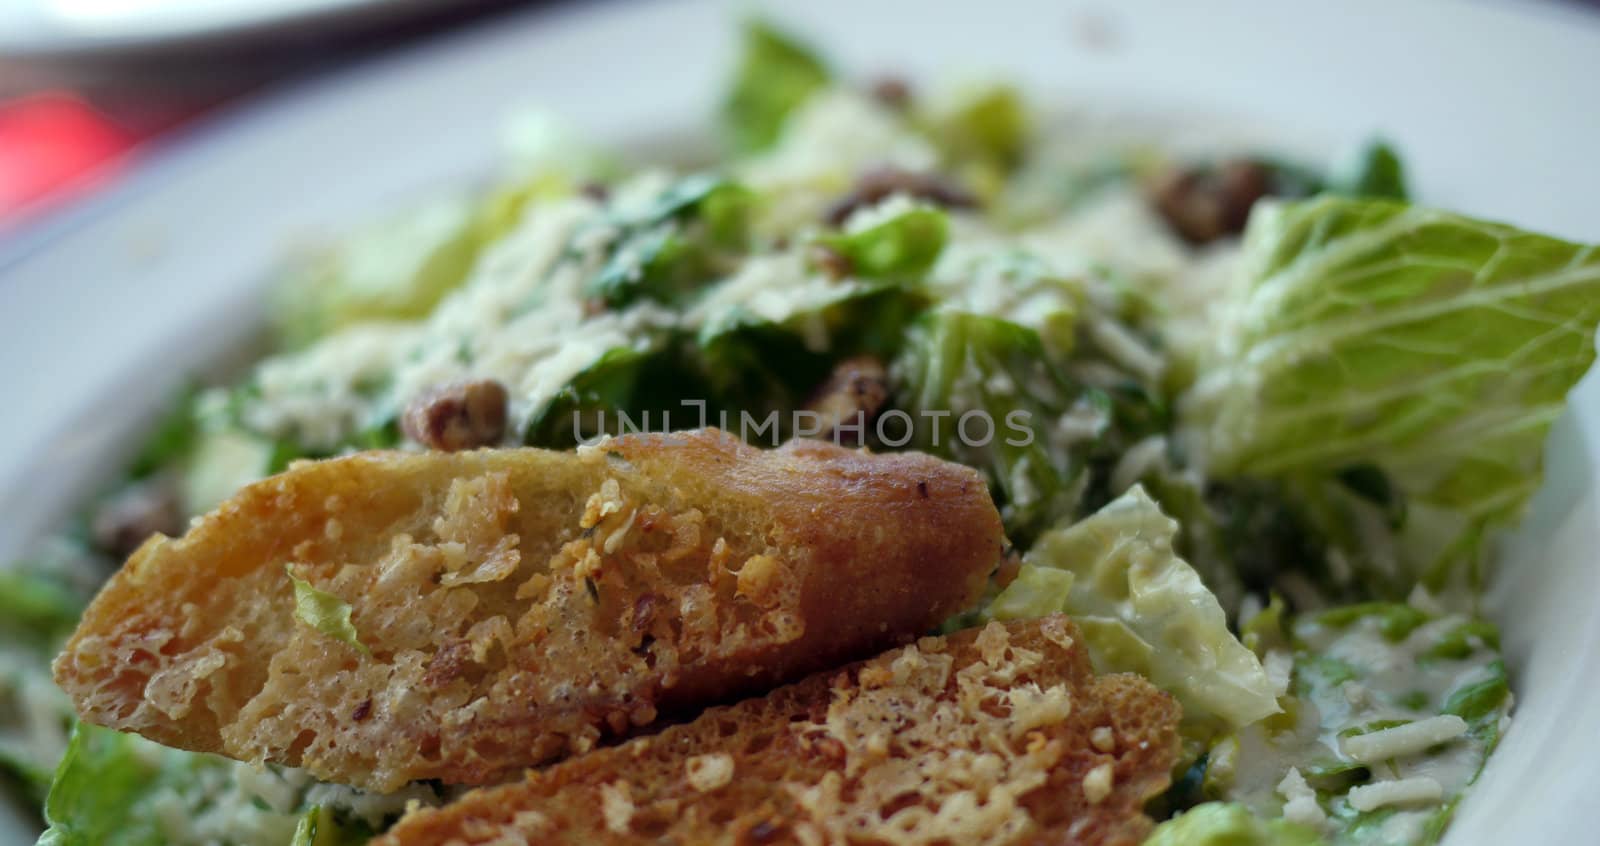 croutons on a ceasar salad very healthy